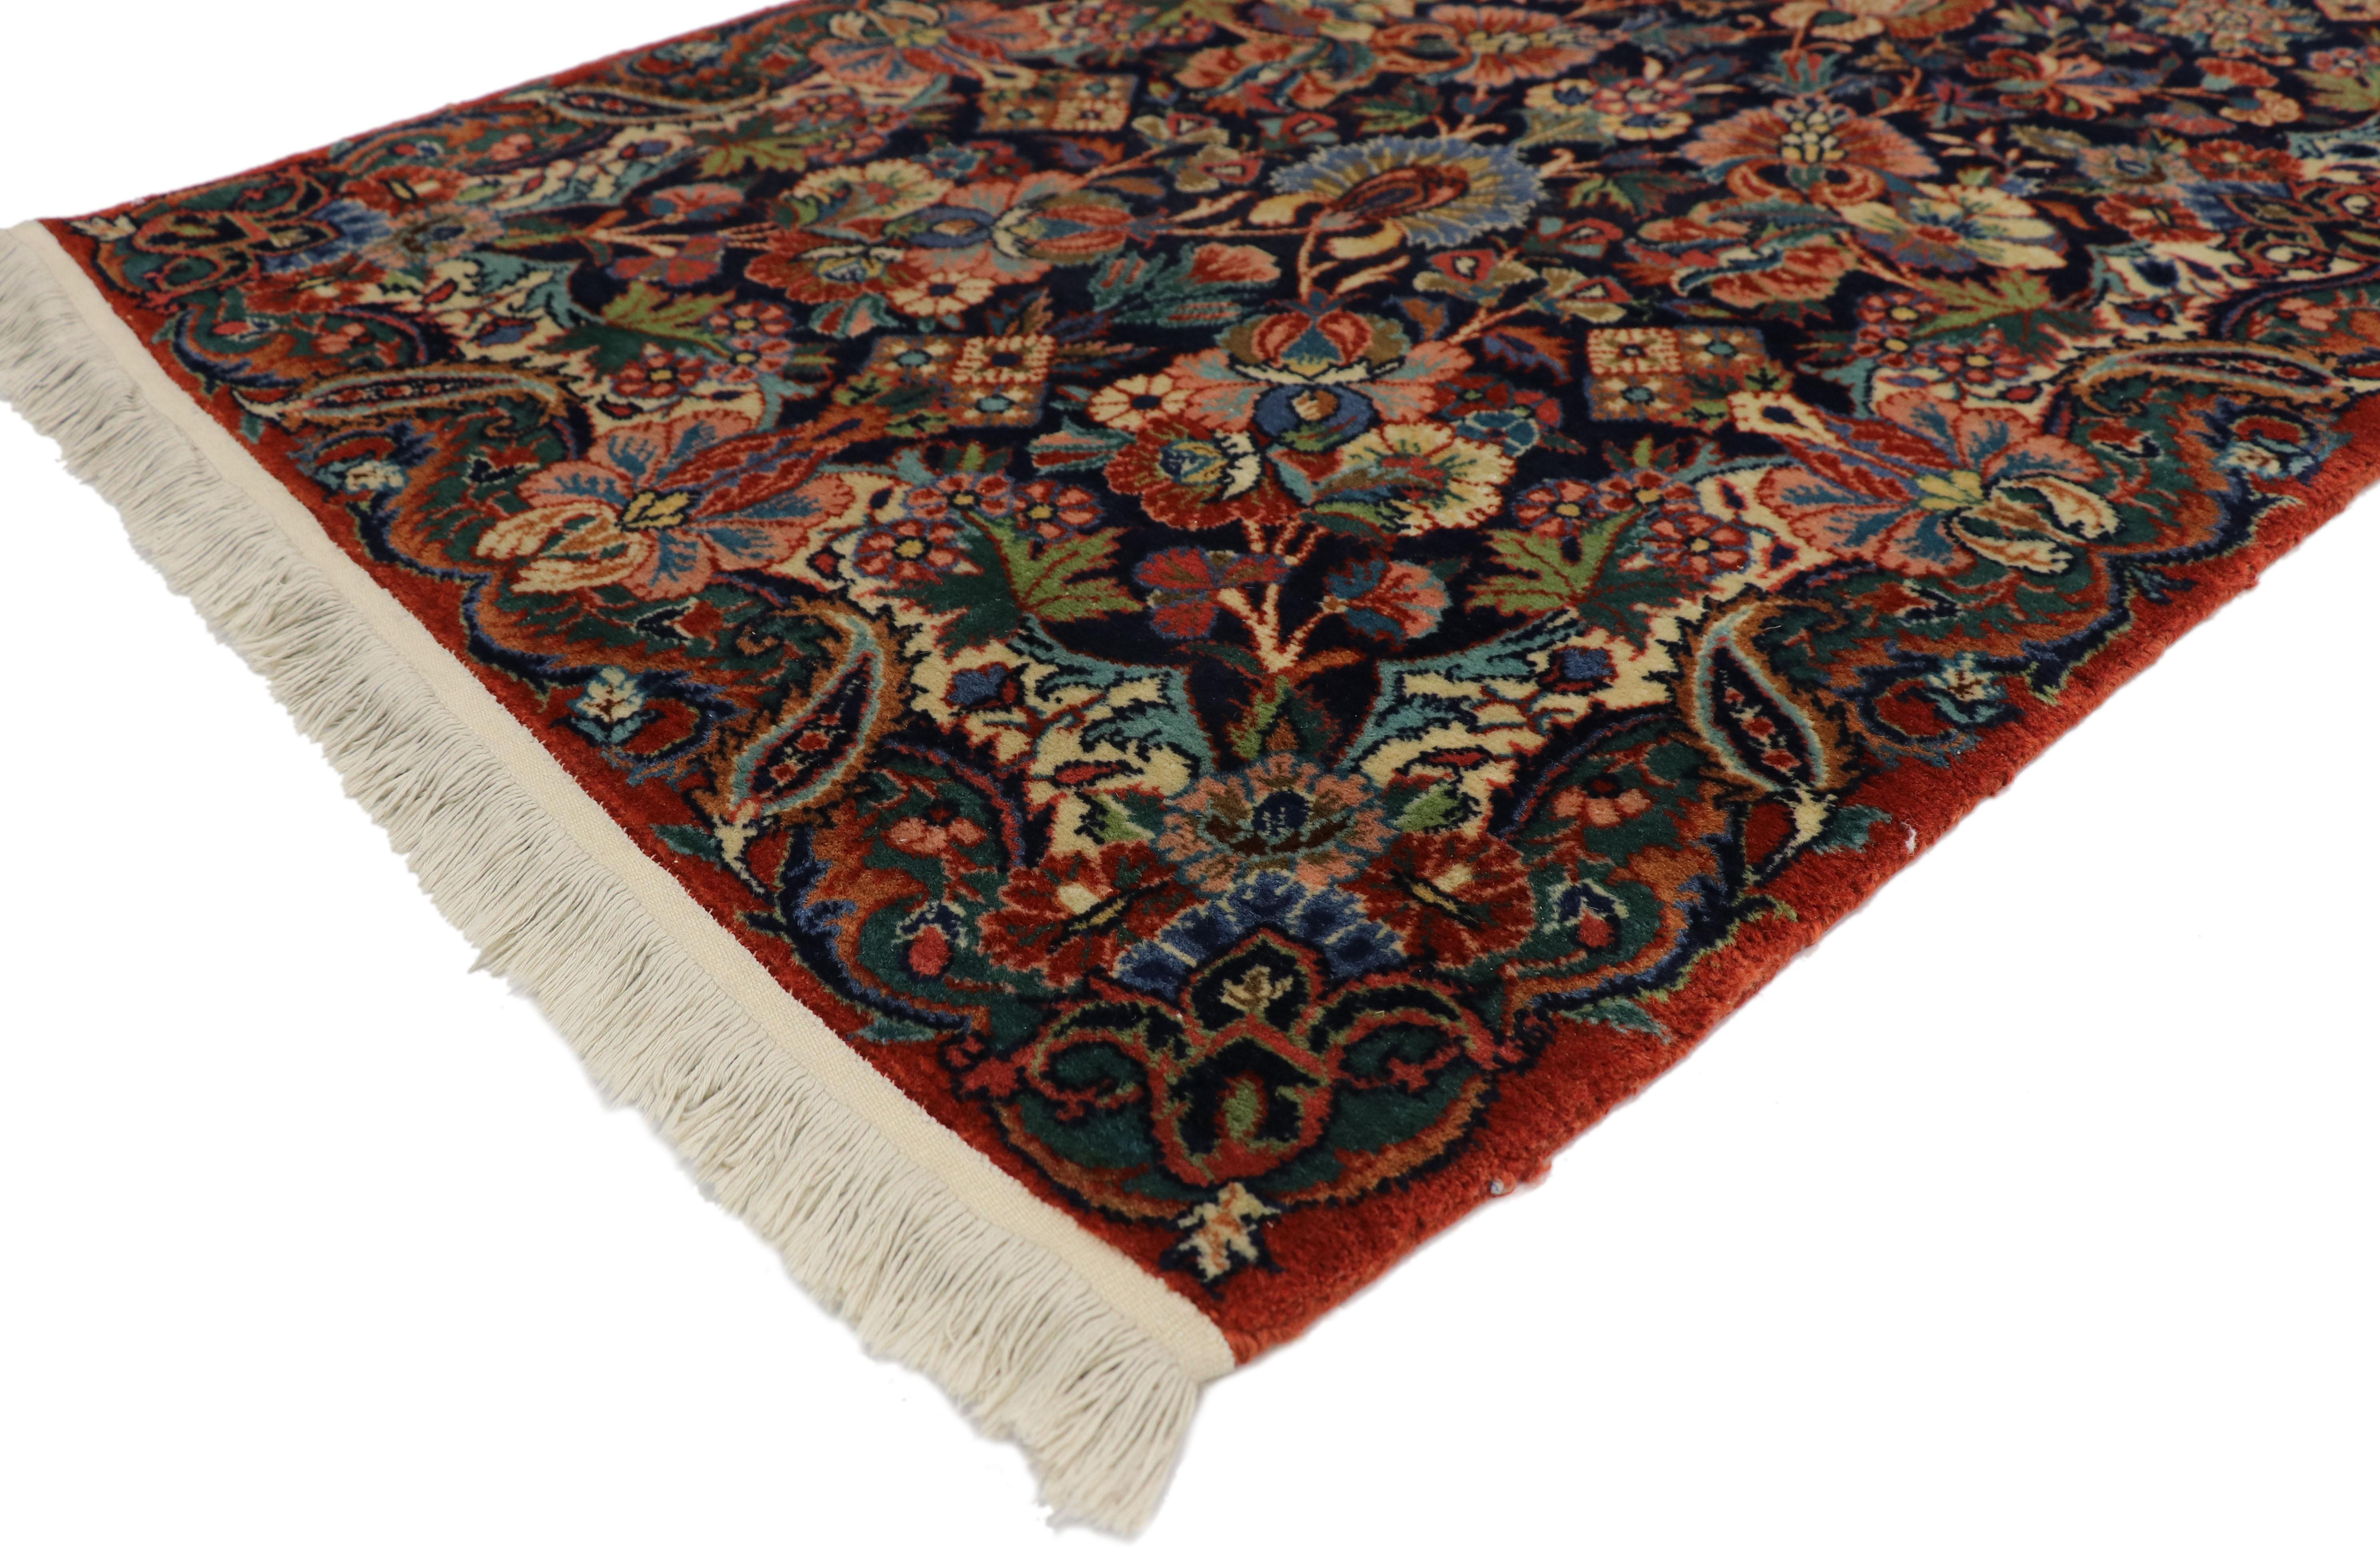 77350, antique Persian Qazvin Kirman rug runner with Luxe Baroque Regency style 02'09 x 17'10. This hand knotted wool vintage Qazvin Kirman Persian runner features a lively all-over floral pattern composed of floral forms, curved sickle leaves,